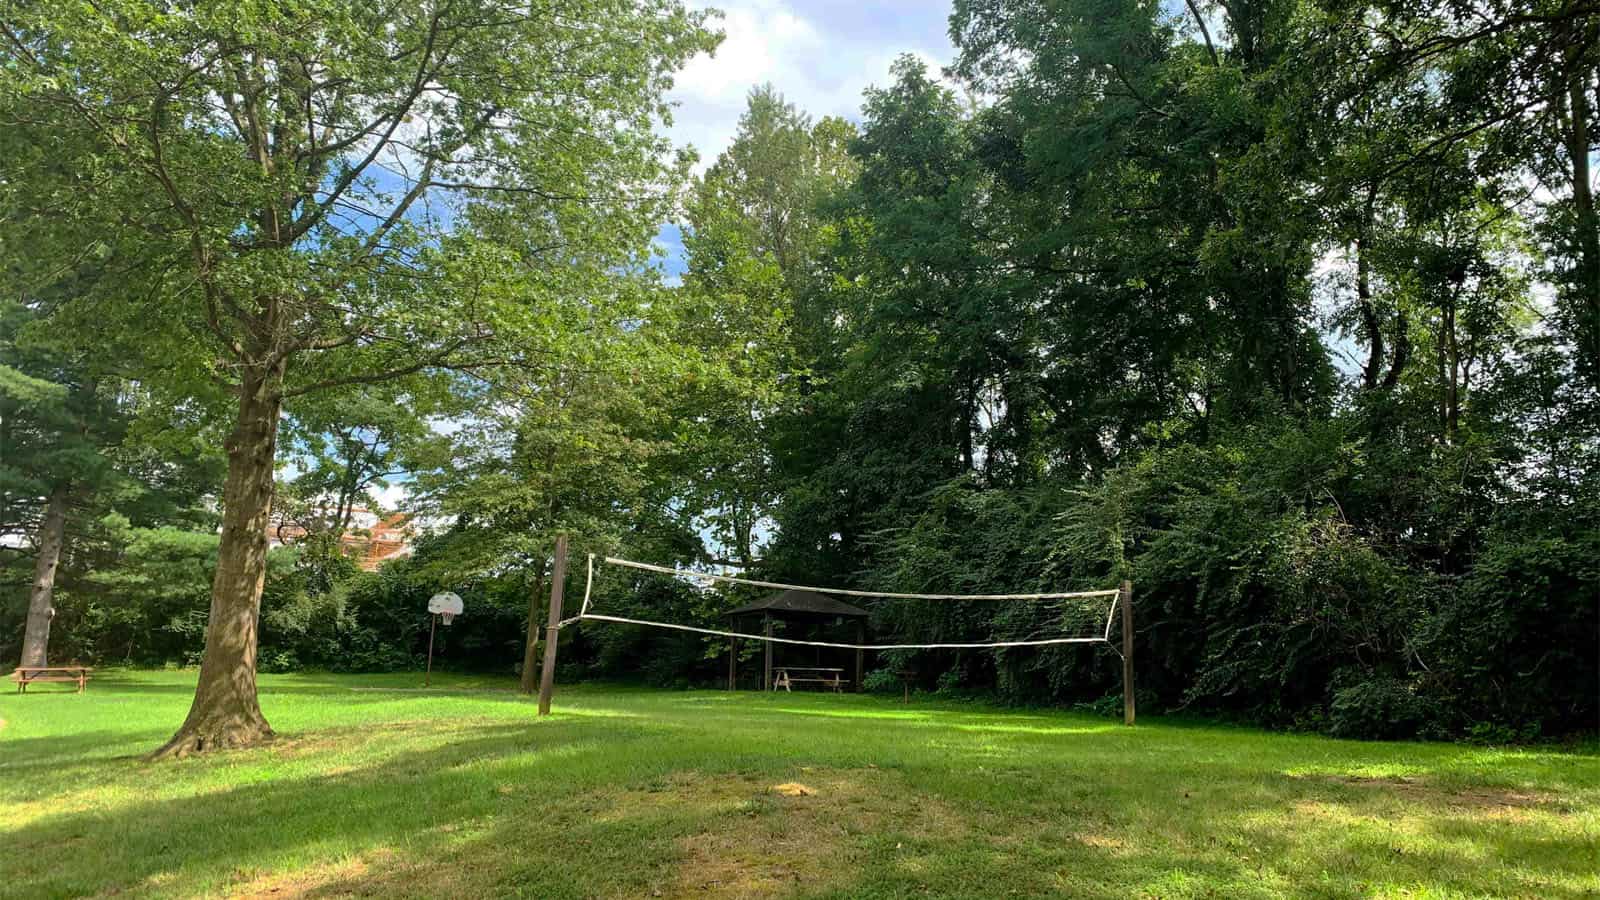 Sandstone Care's Reston Rehab Centers outdoor area with green trees, a grassy field featuring a volleyball net, and a picnic bench under the shade